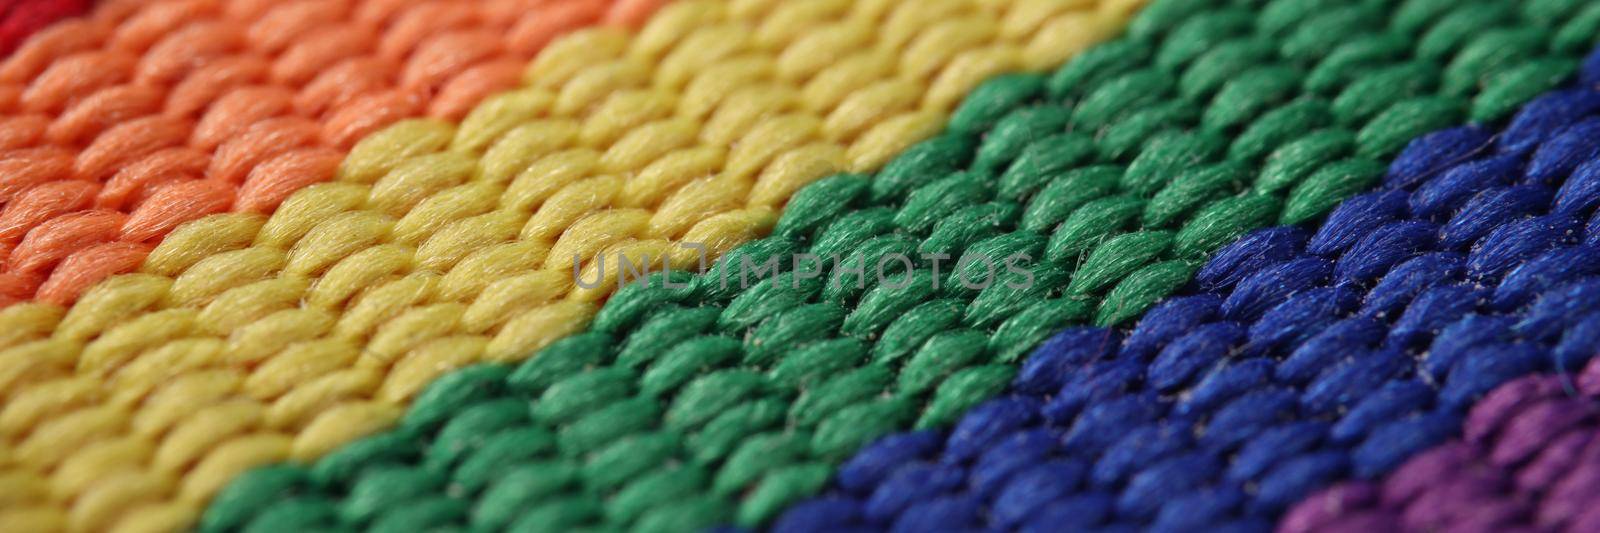 Close-up of rainbow lgbt carpet or flag symbol of bisexual homosexual gay lesbian transgender idea. Textile material, support lgbt. Gay movement concept